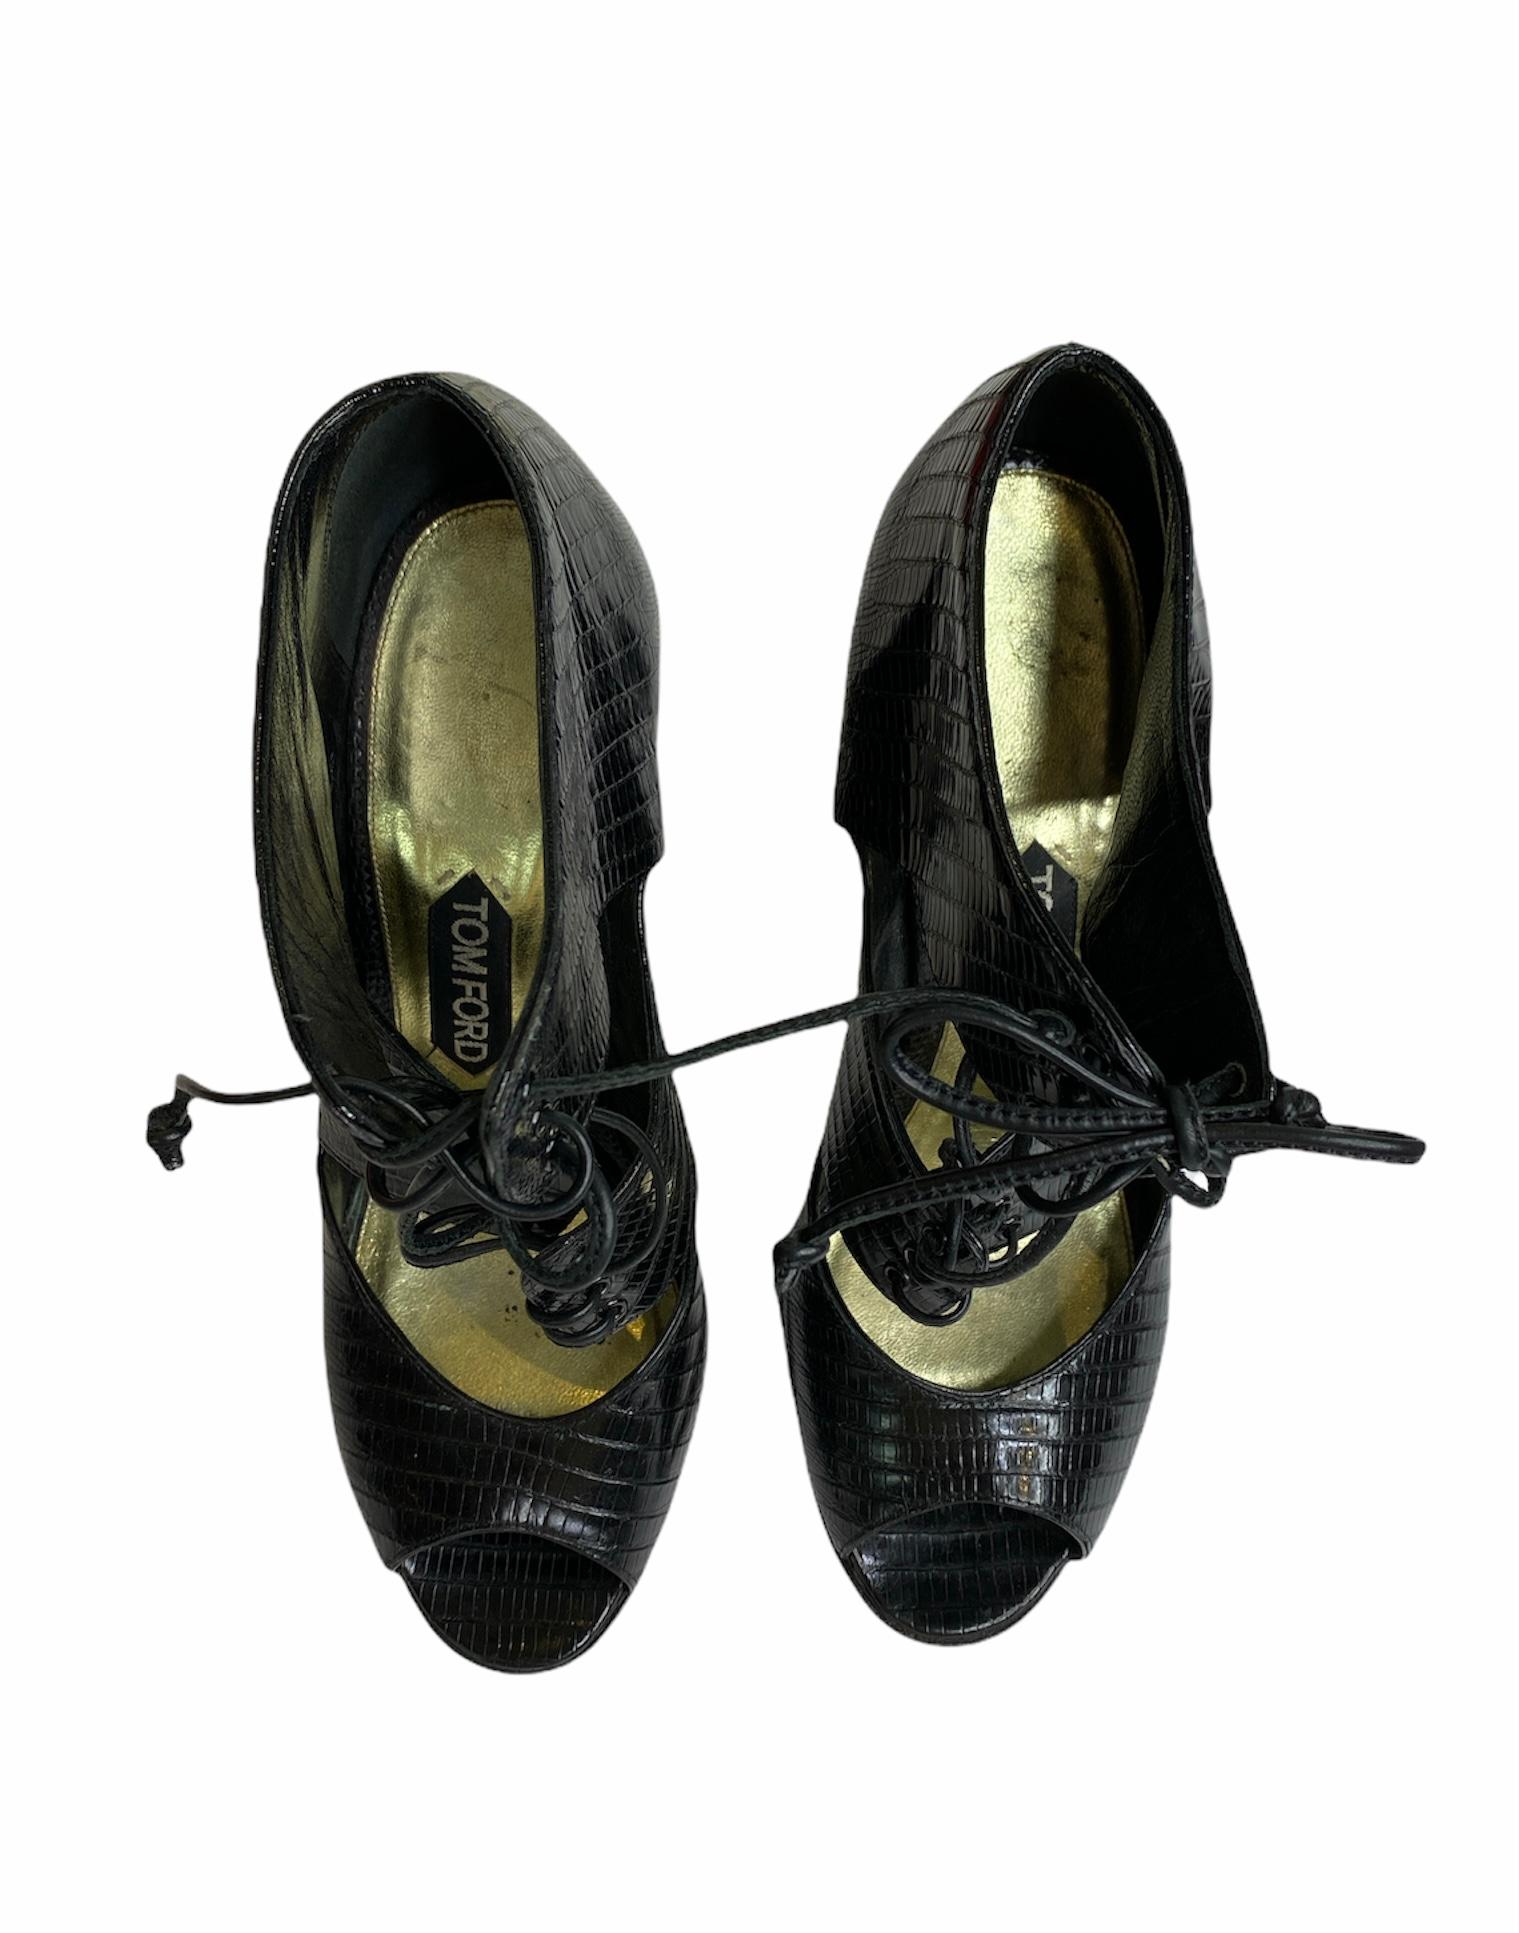 2000S TOM FORD Black Teju Lizard Leather Heels In Excellent Condition For Sale In New York, NY